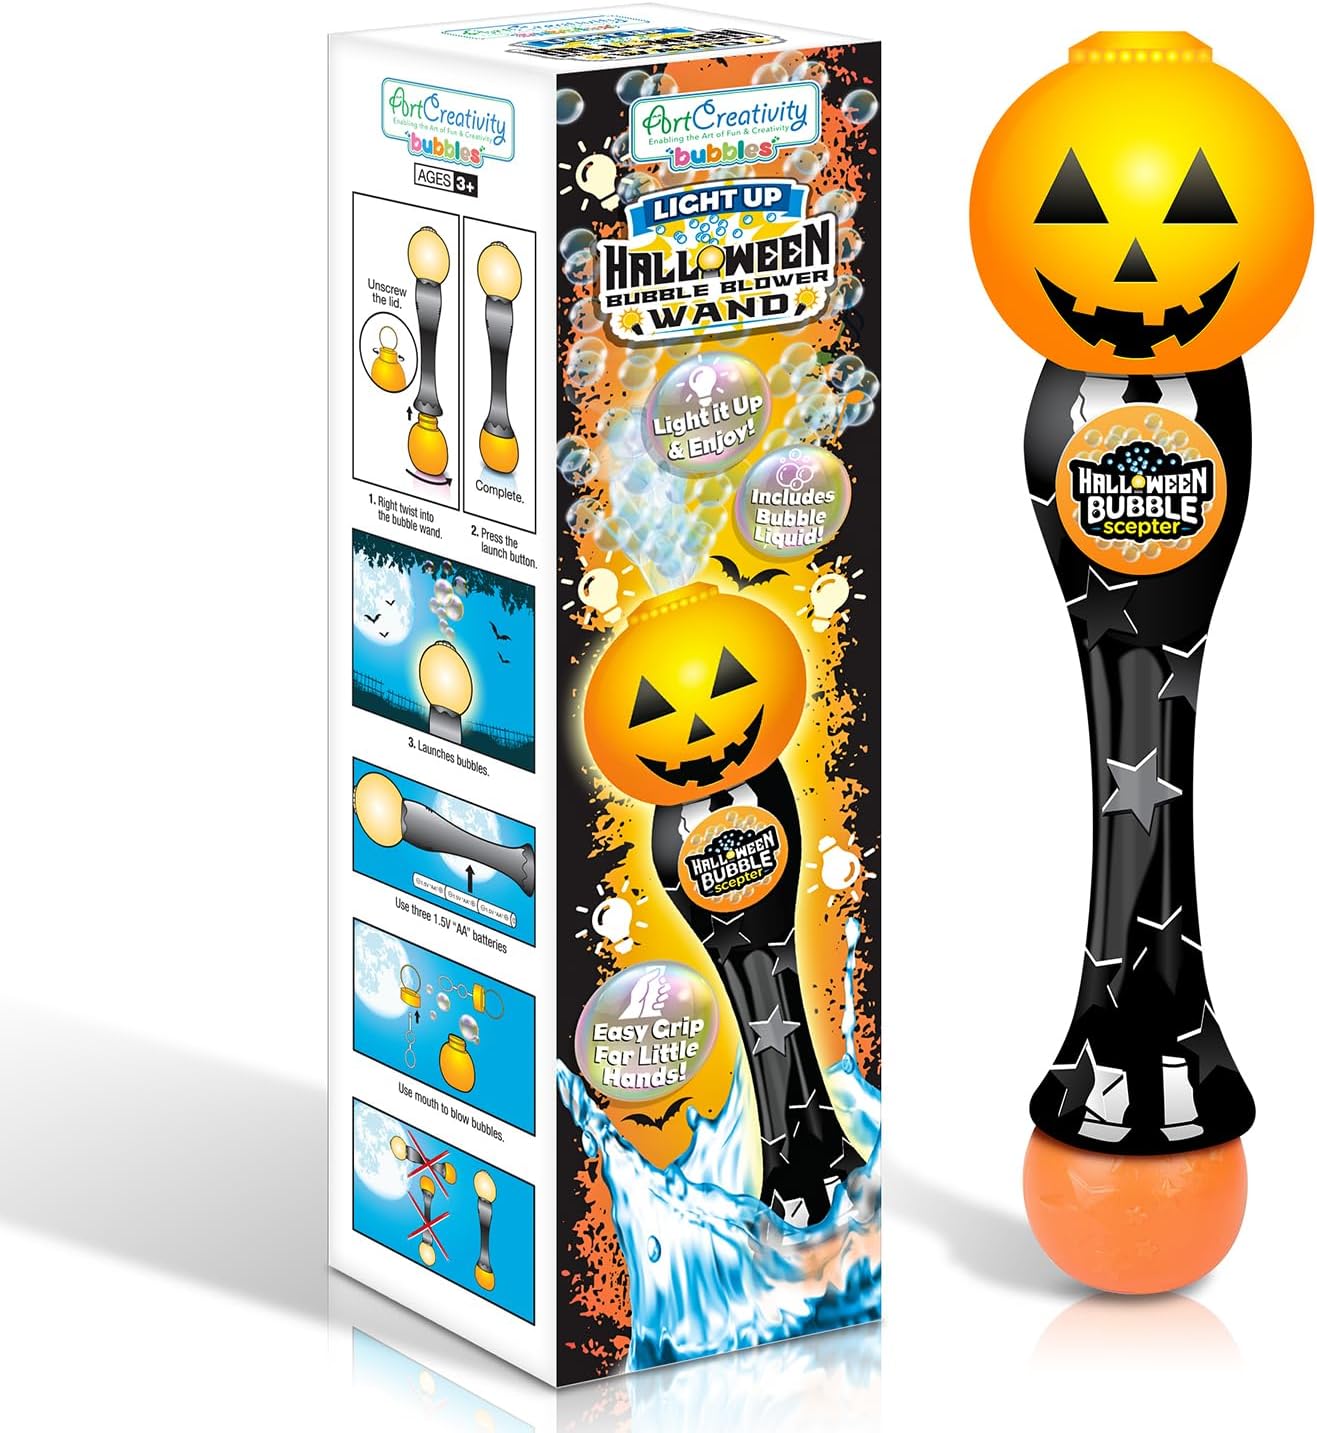 ArtCreativity Halloween Bubble Wand, 14" Illuminating Bubble Wand for Kids, Halloween Light up Pumpkin Bubble Blower Wand with Thrilling LED & Sound Effect, Halloween Toys for Kids